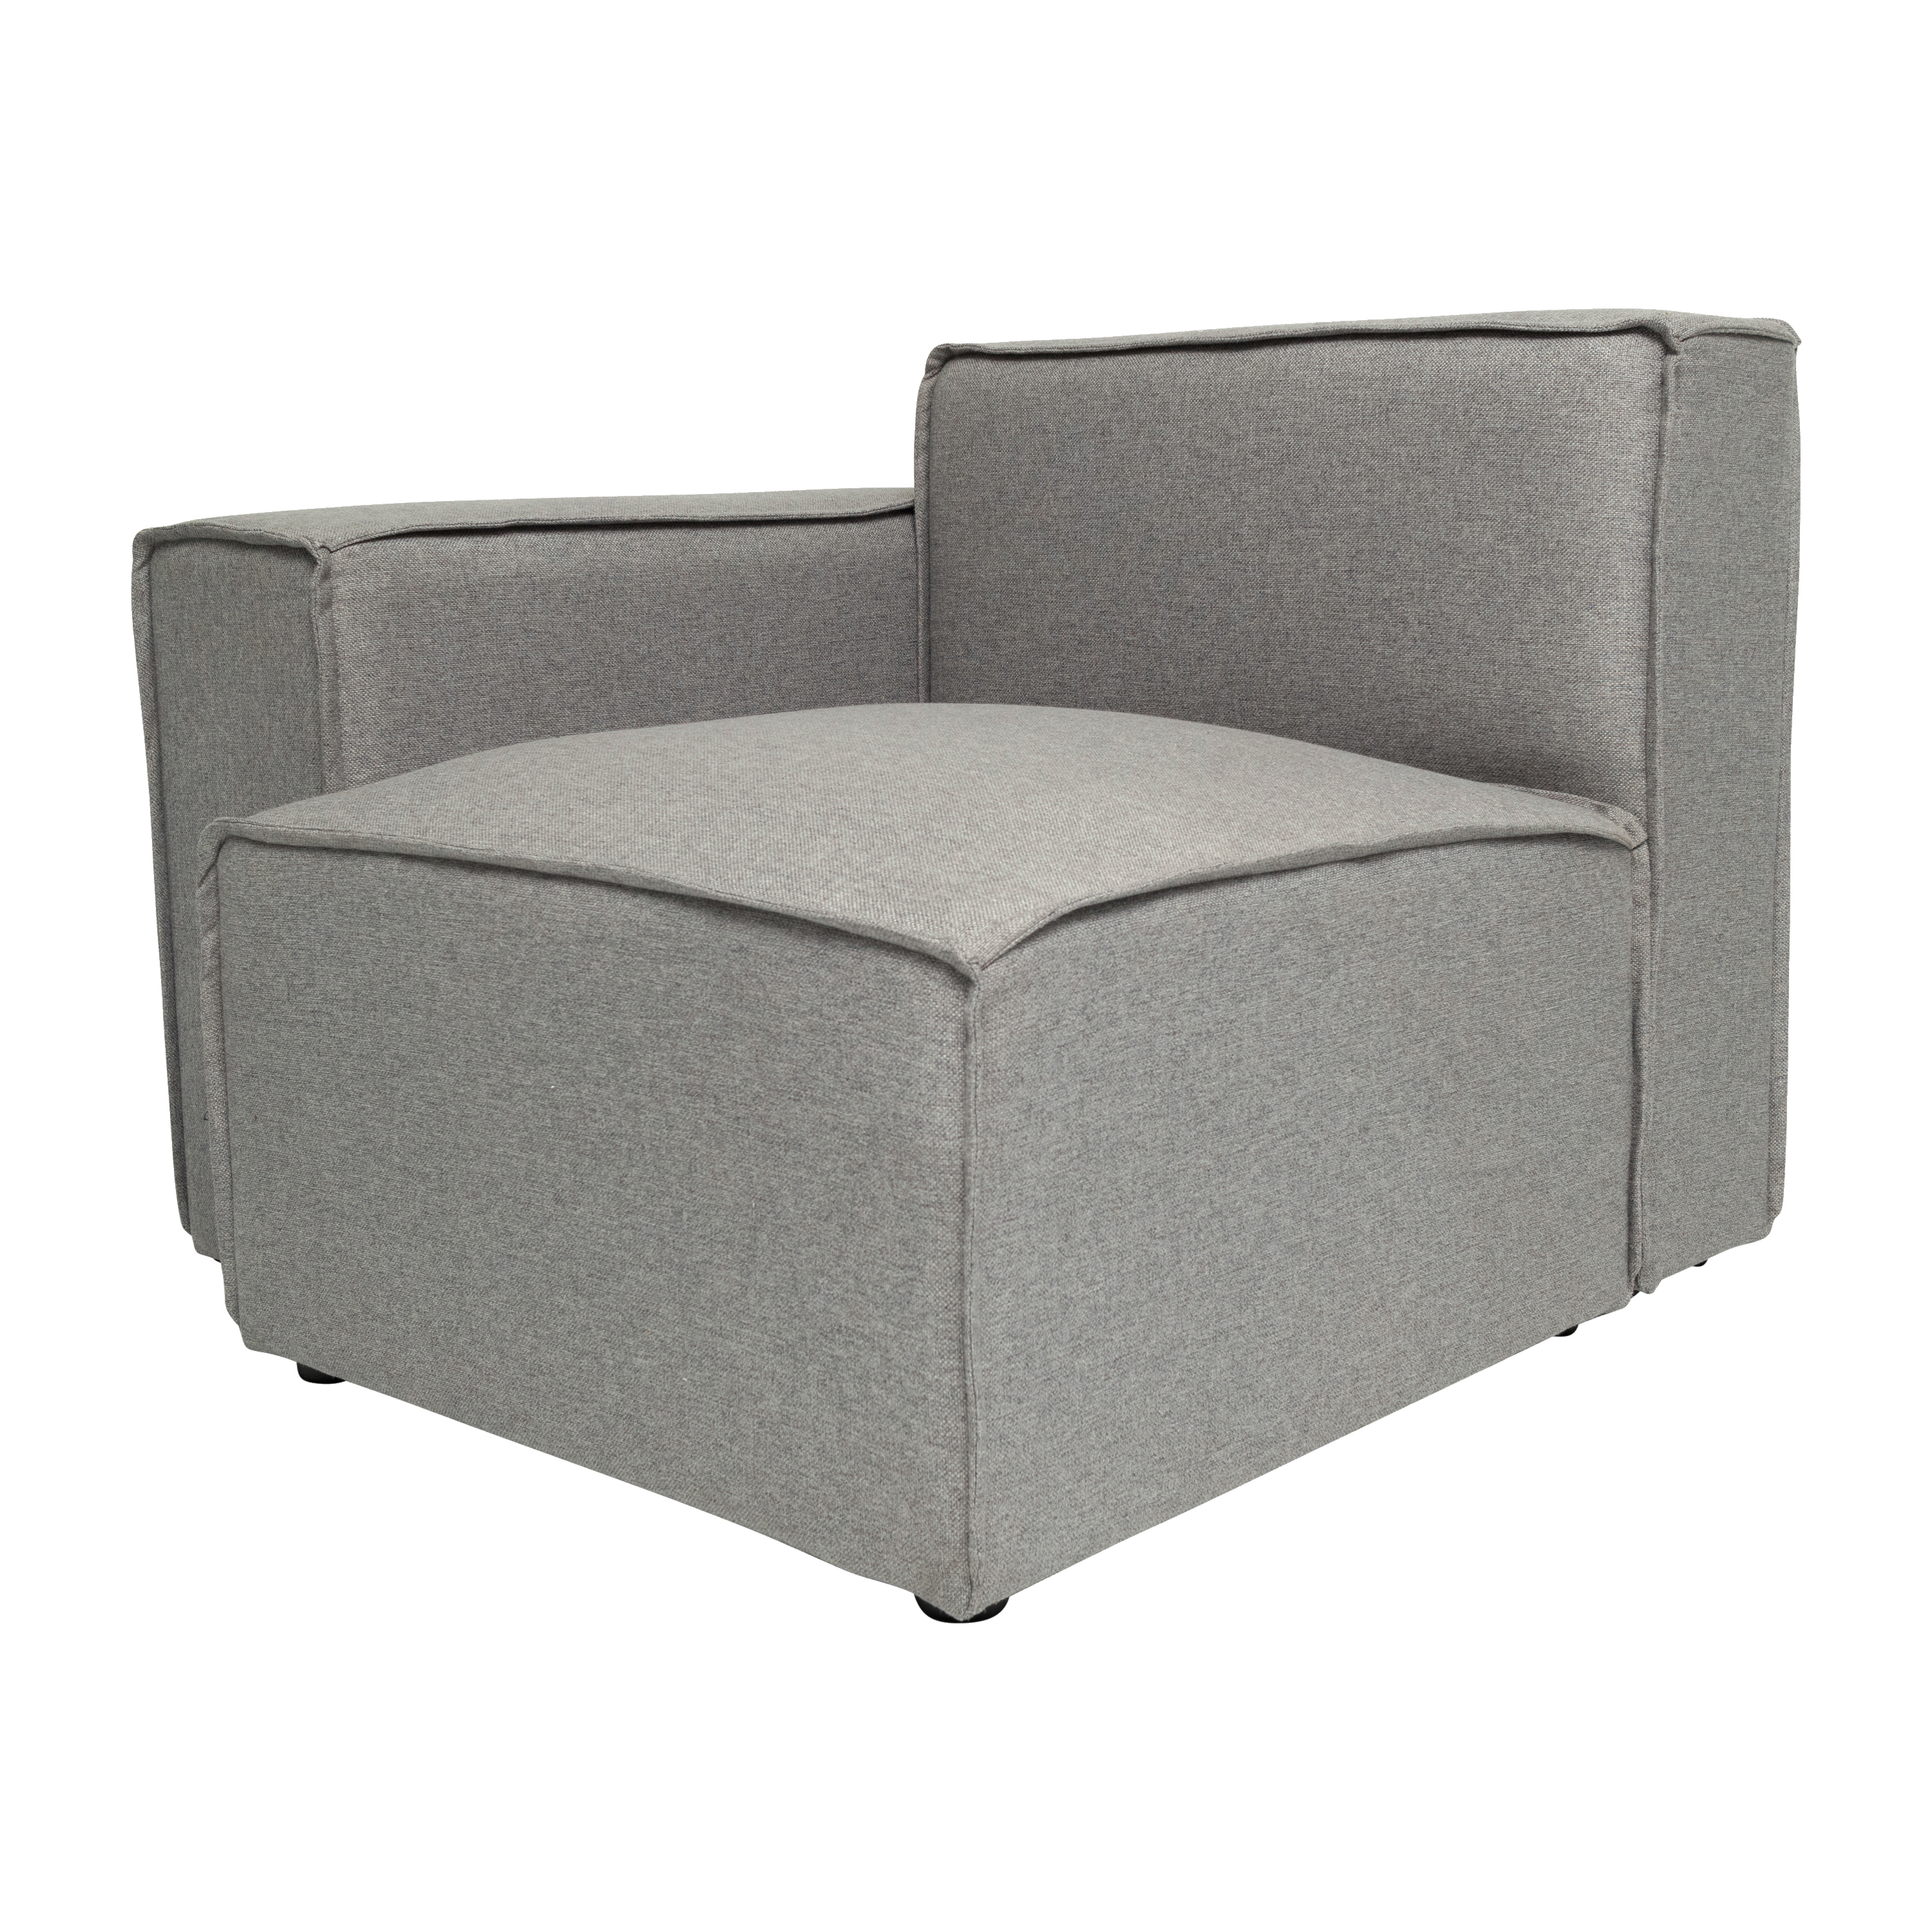 Flash Furniture IS-IT2231-LC-GRY-GG Luxury Modular Sectional Sofa, Left Side with Arm Rest, Gray